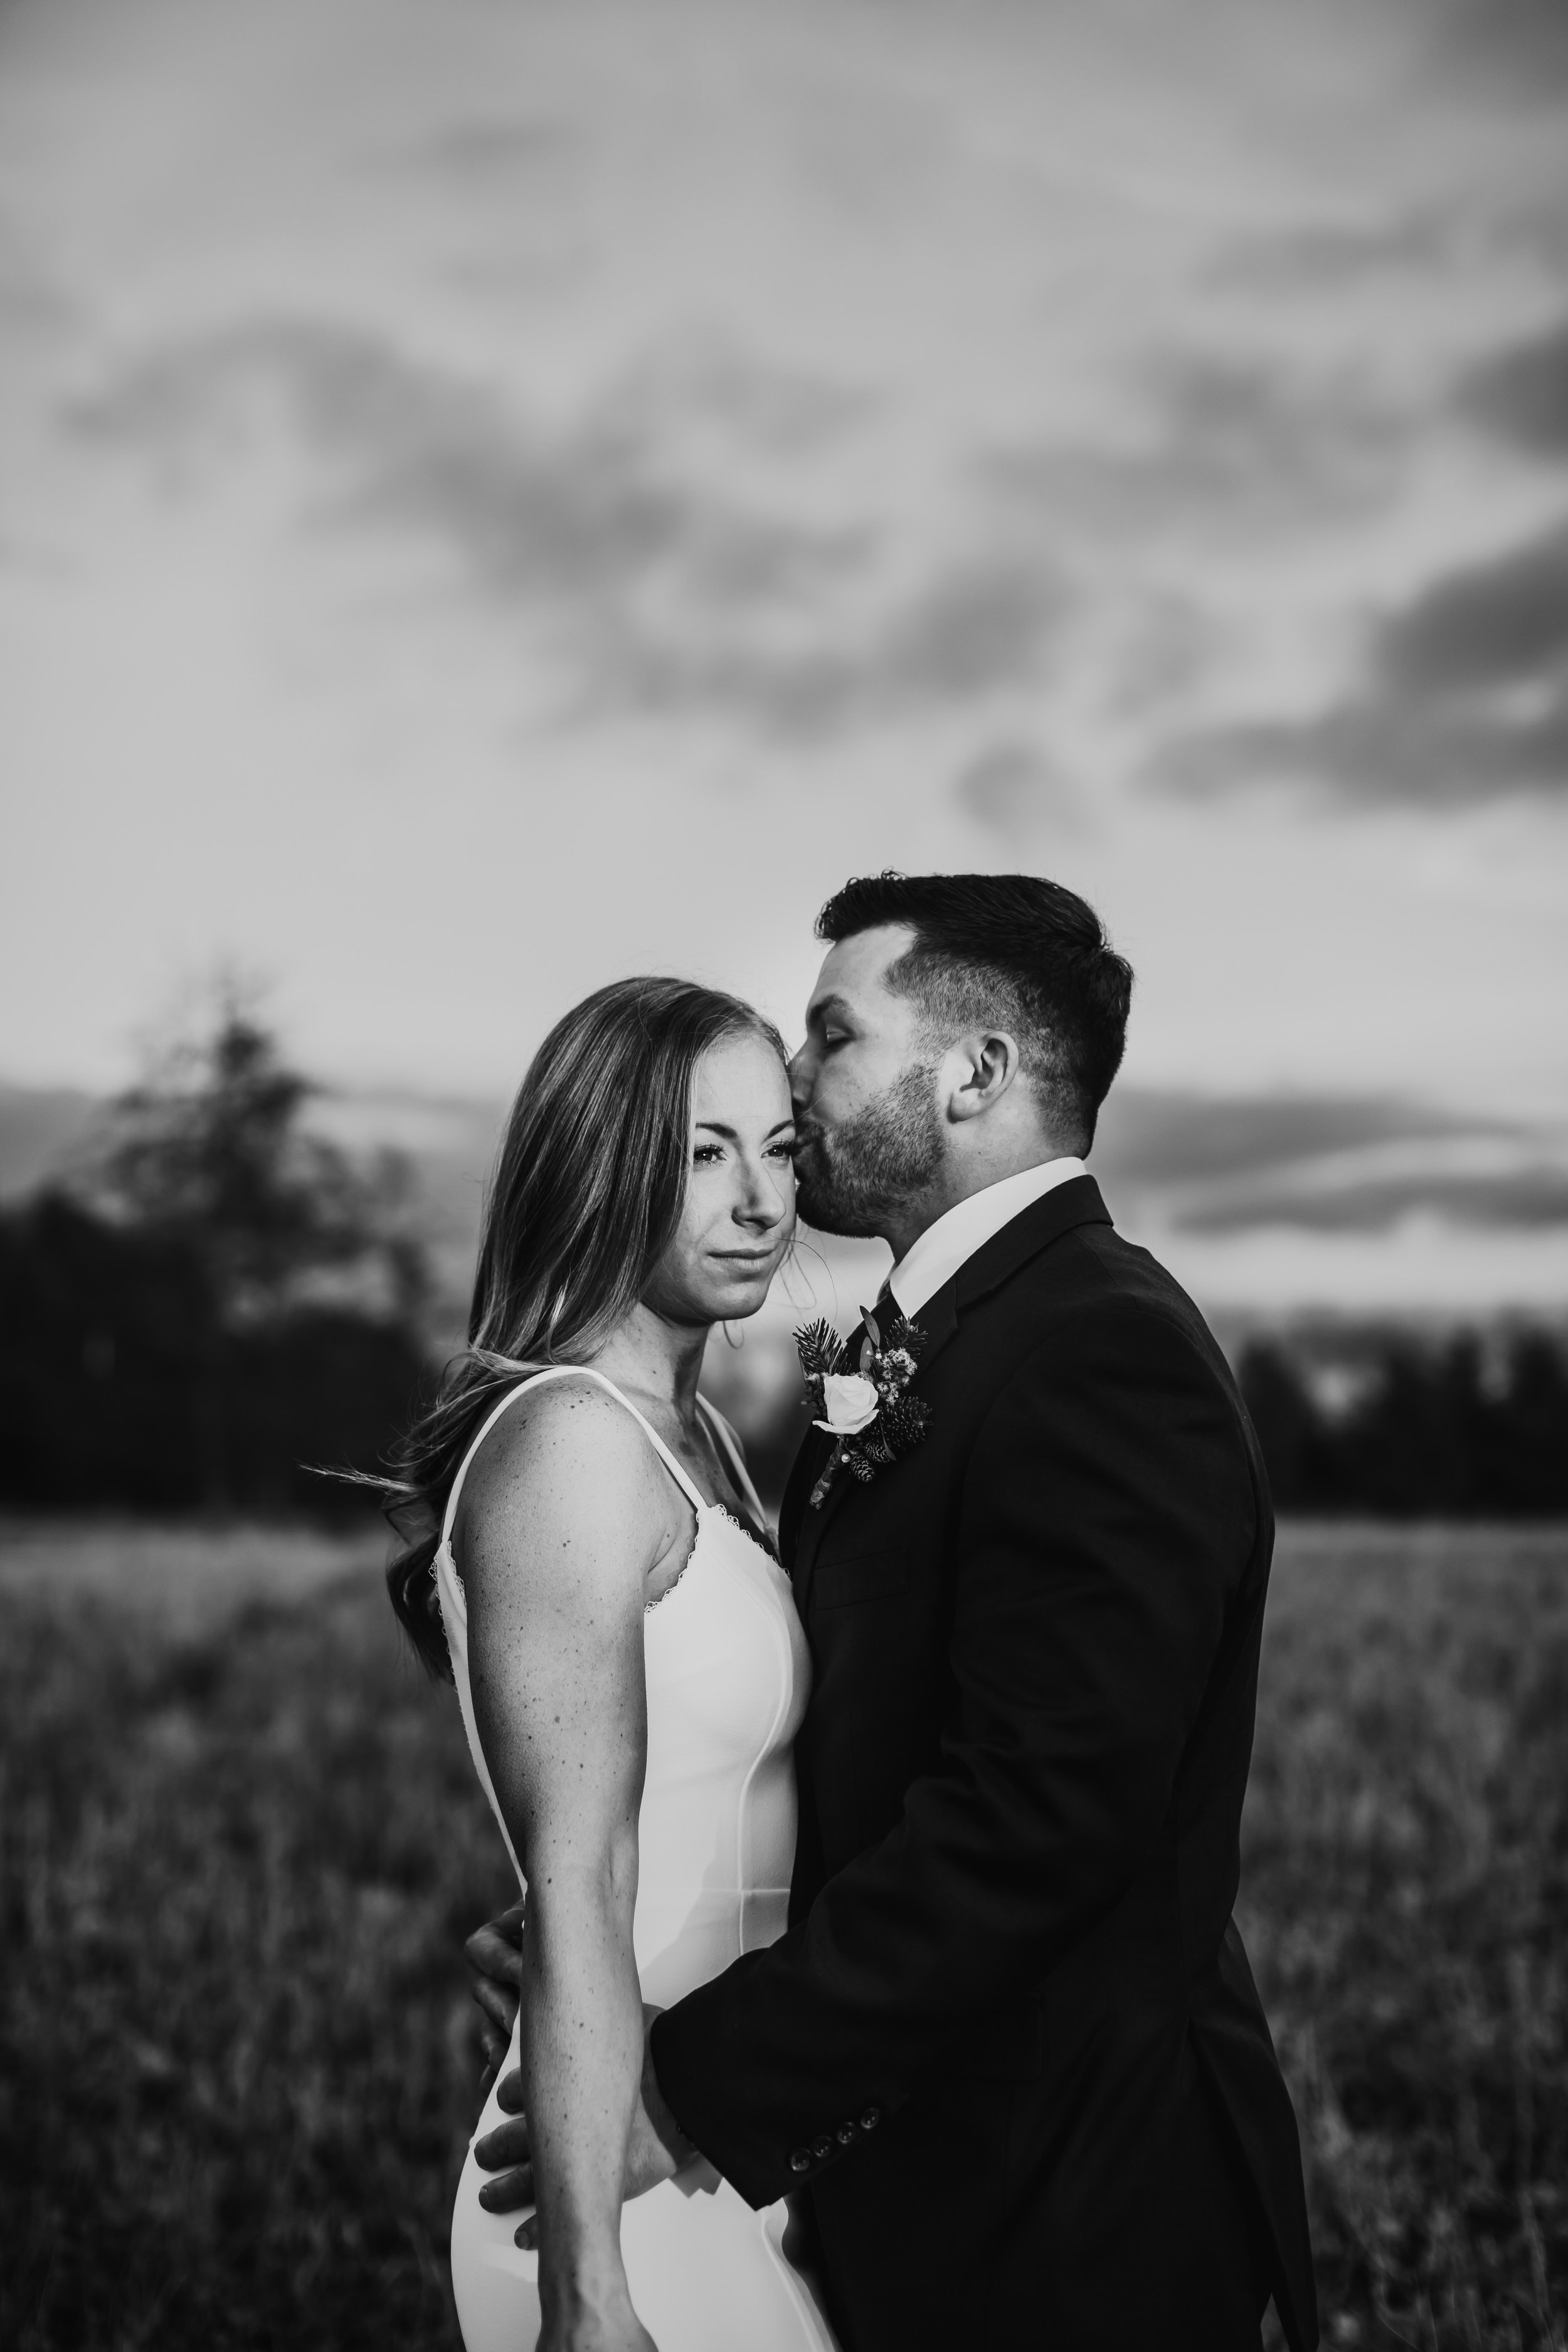  A Black and white portrait of a groom kissing the bride's head was captured by Teala Ward Photography in LaSalle. newlyweds she said yes #tealawardphotography #tealawardweddings #LaSalleIllinois #IronwoodontheVermillion #weddingphotographyIL 